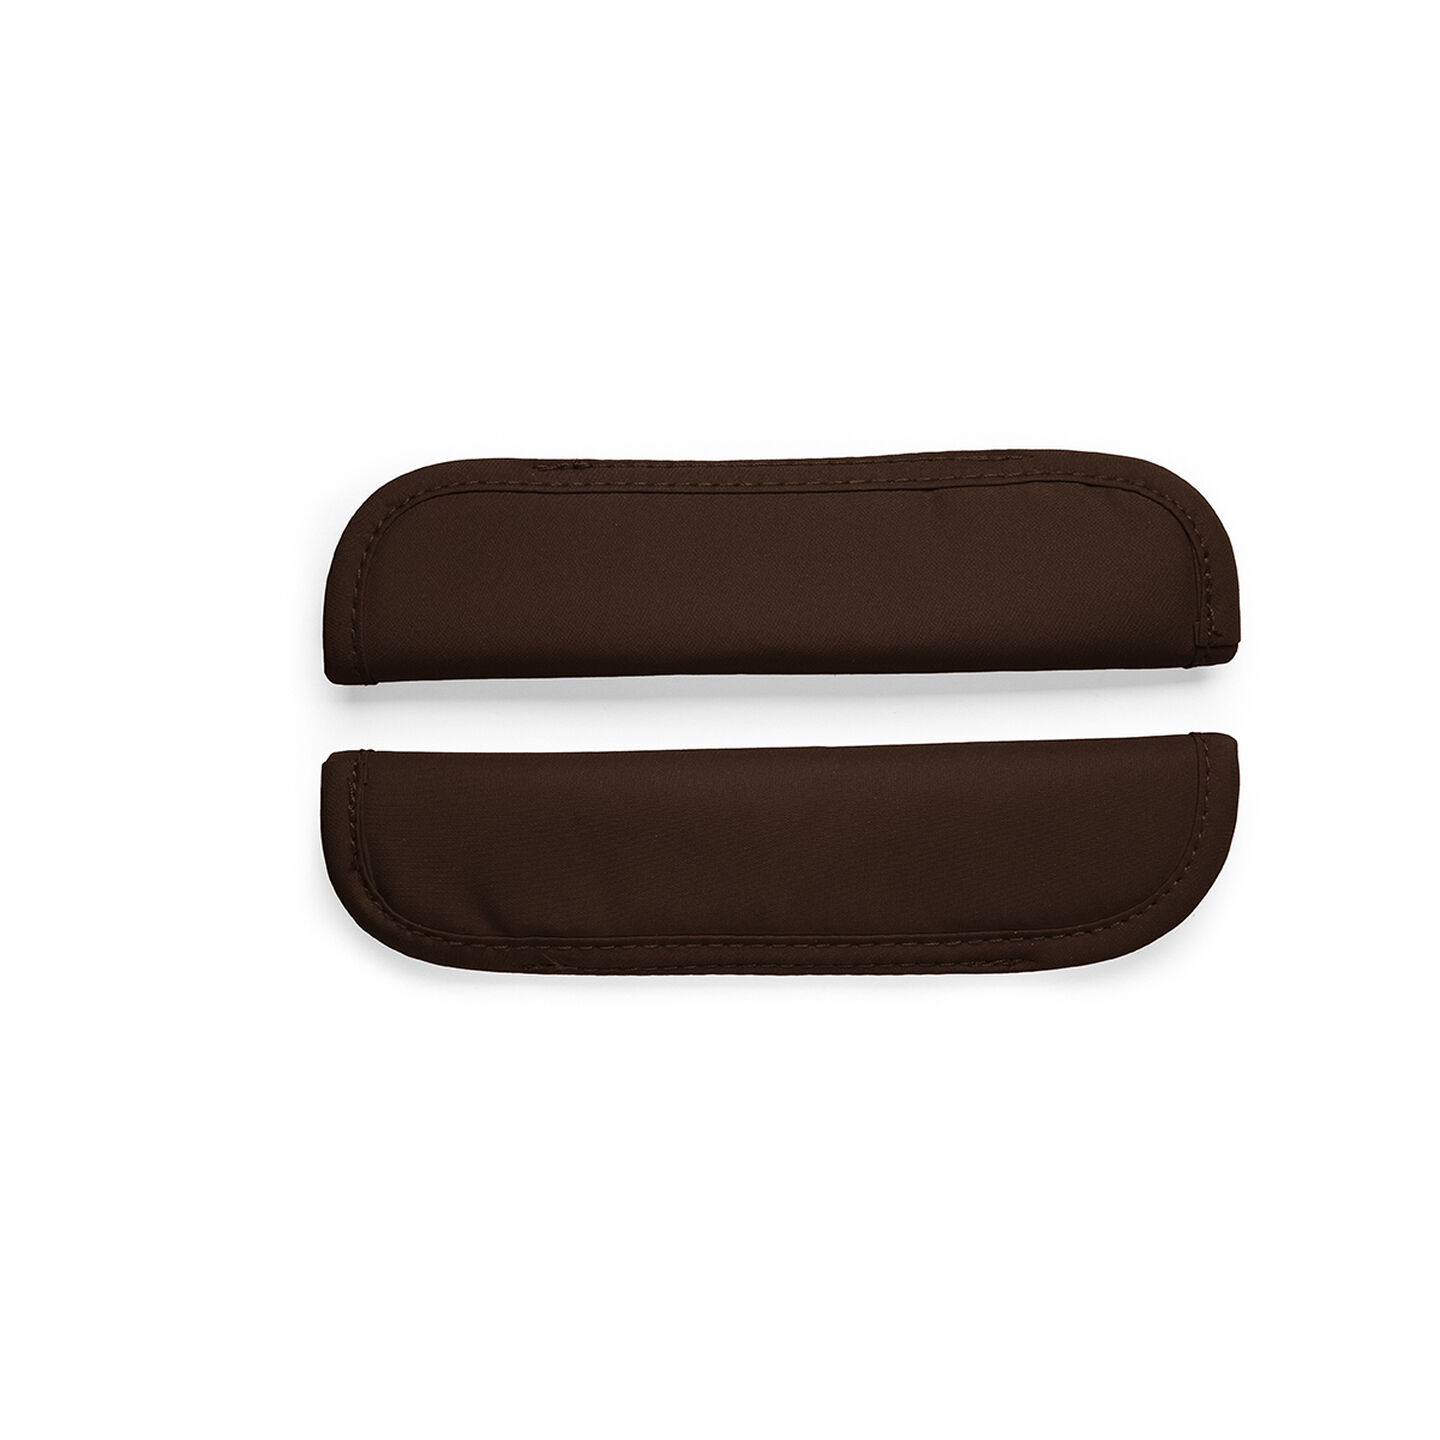 Stokke® Xplory® Selebeskytter Brown, Brown, mainview view 1